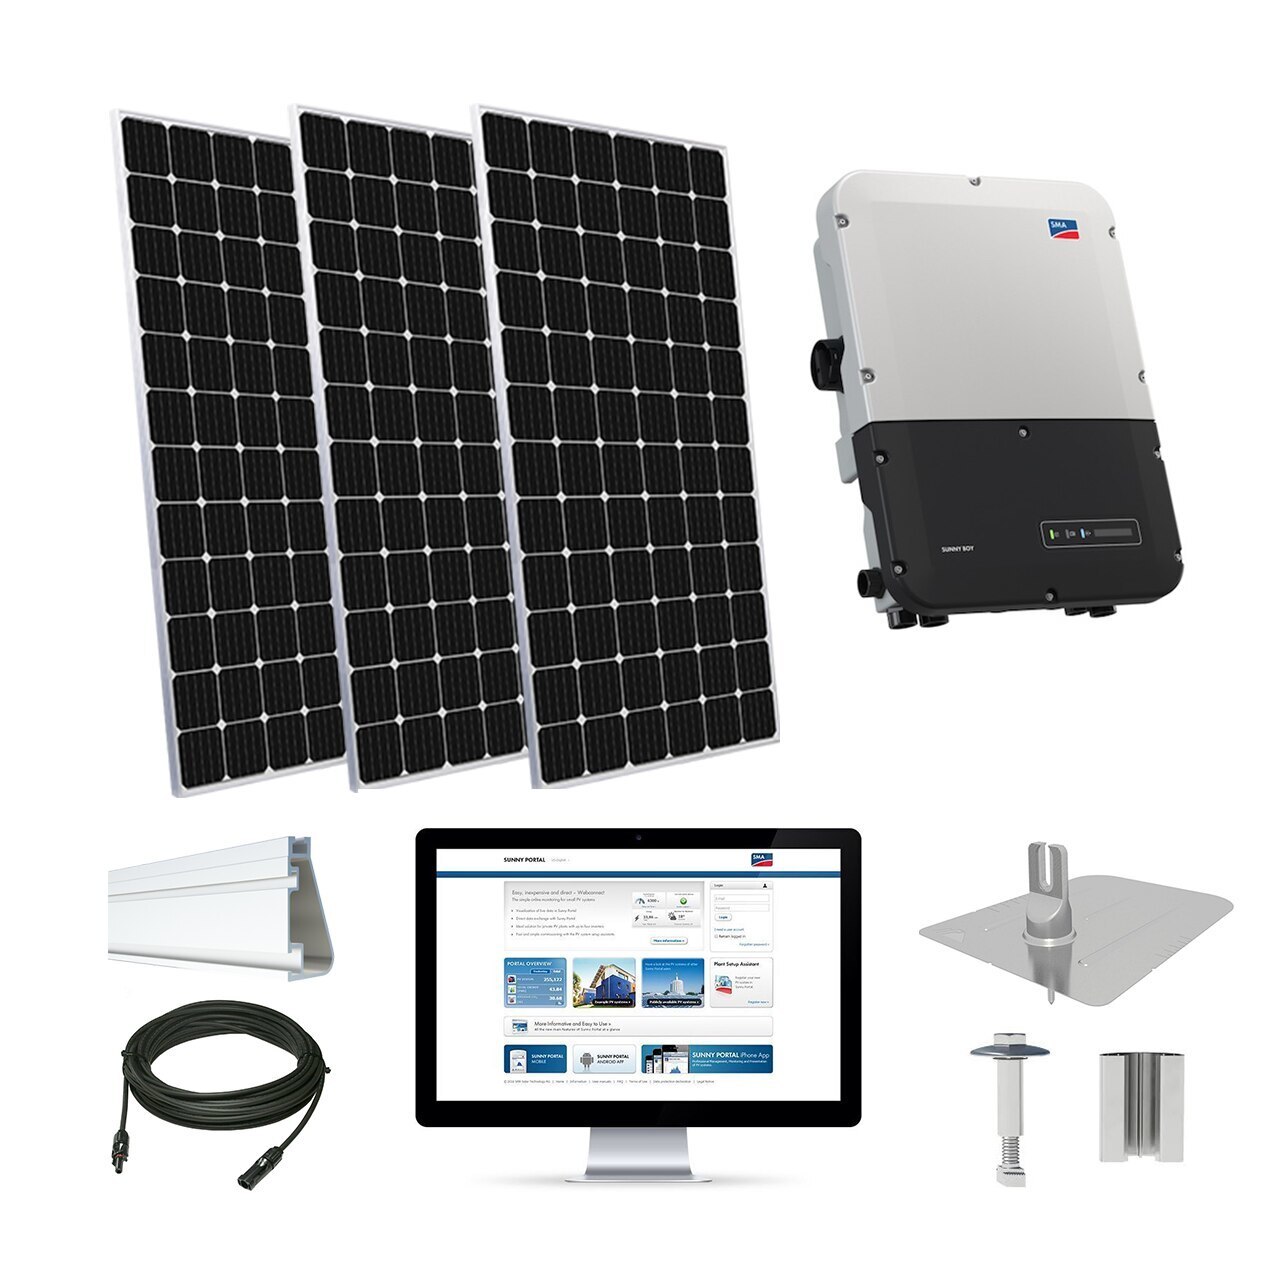 Are Csun Panels The Best Solar Panels To Buy Solarreviews